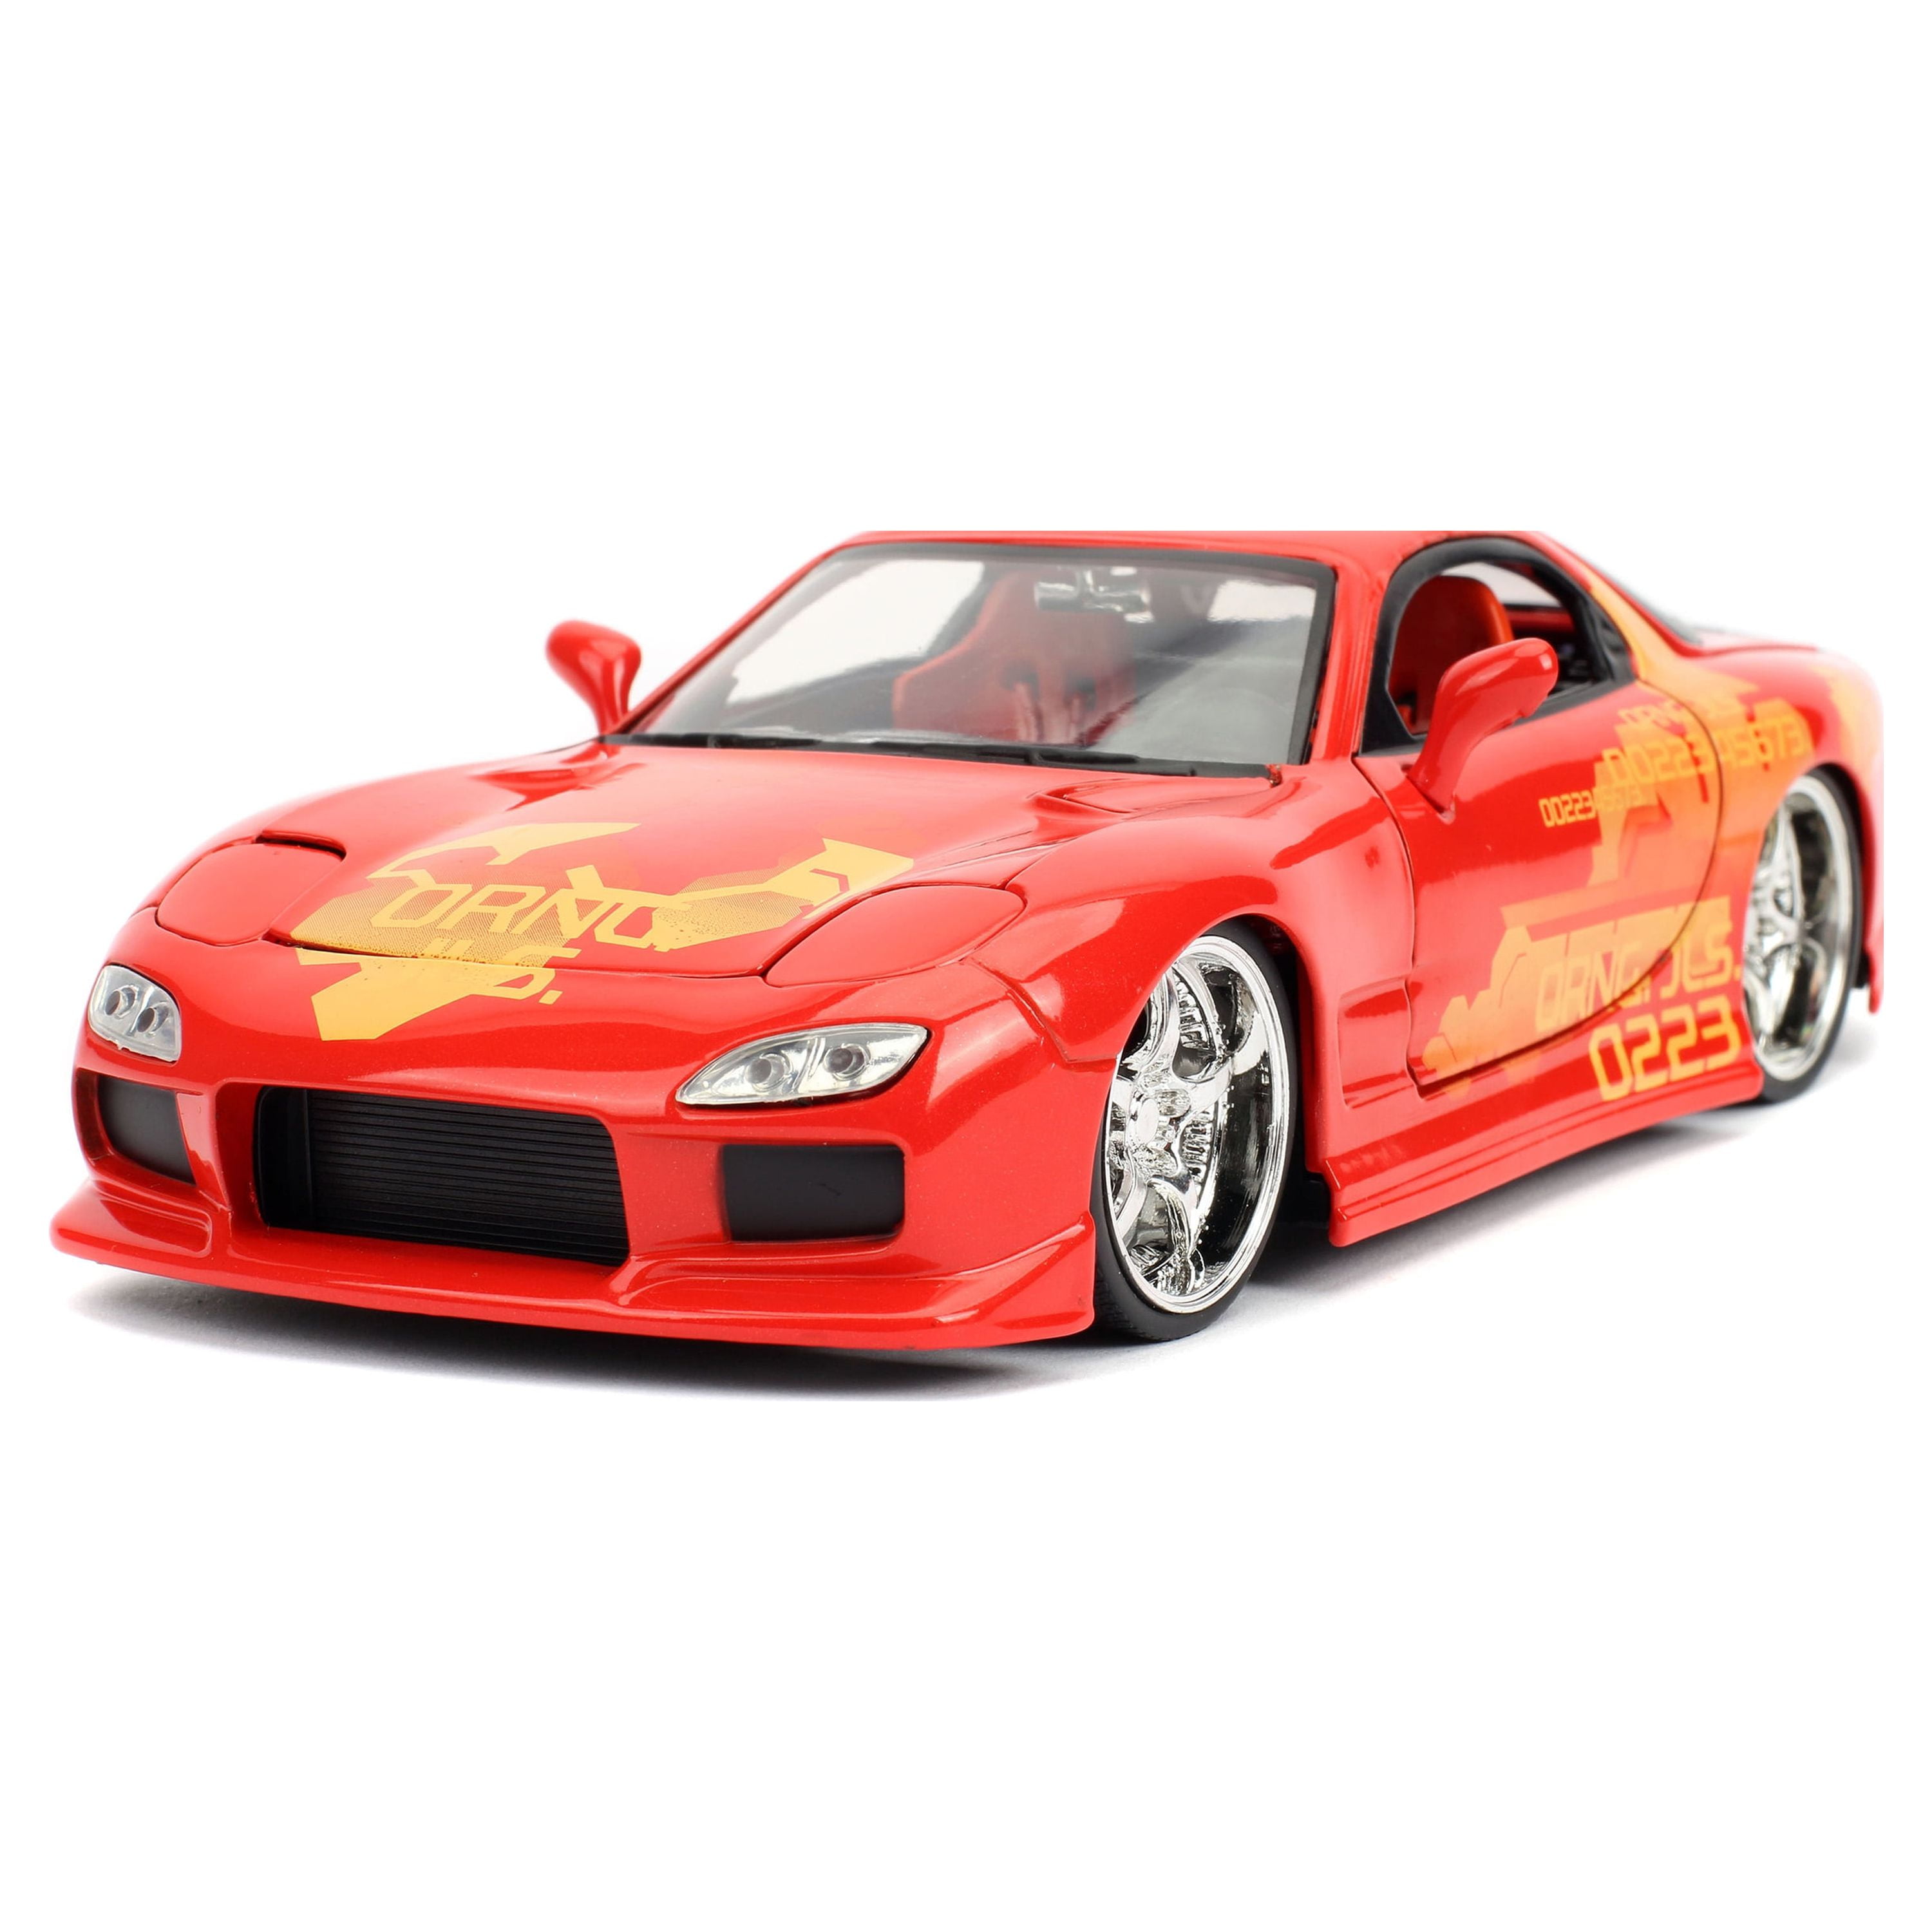 Buy Jada Toys Fast & Furious 1:24 1995 Mazda RX-7 Widebody Die-cast Car  w/Han's 2.75 Die-cast Figure, Toys for Kids and Adults Online at Low  Prices in India - .in